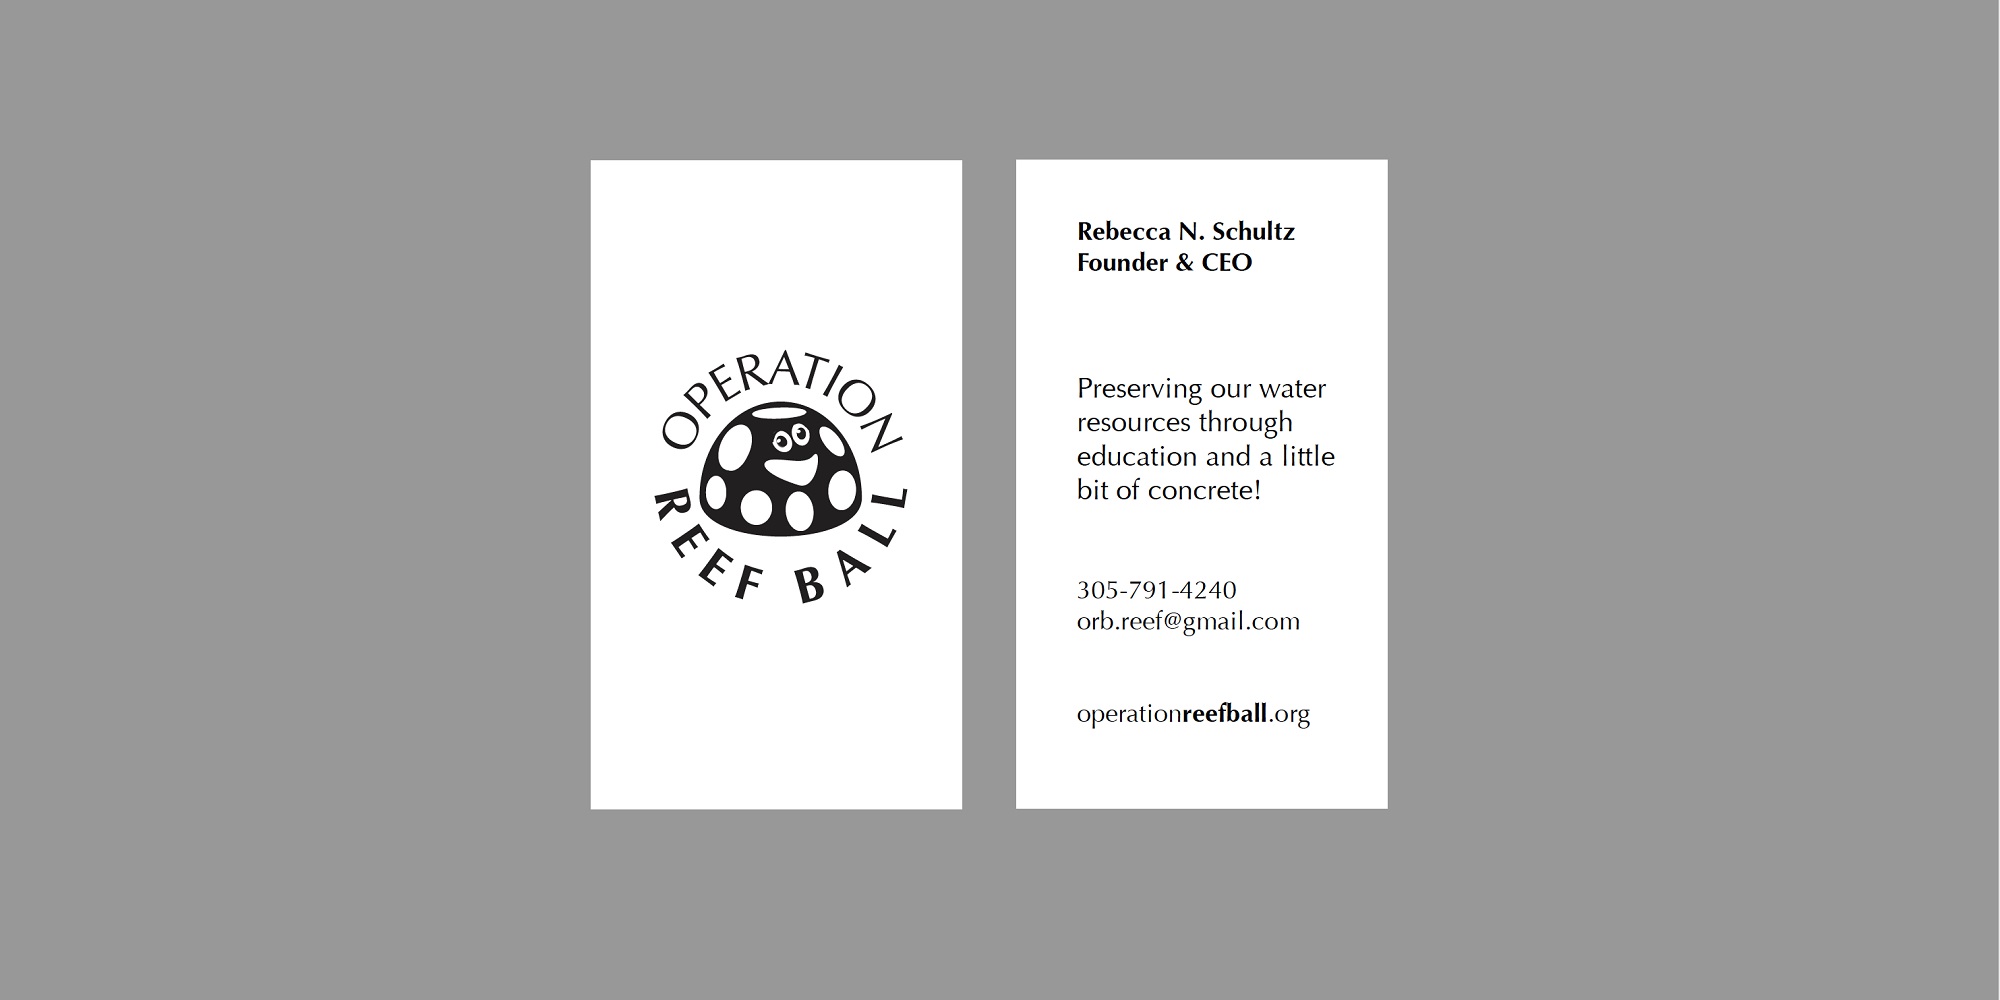 image of business card front and back